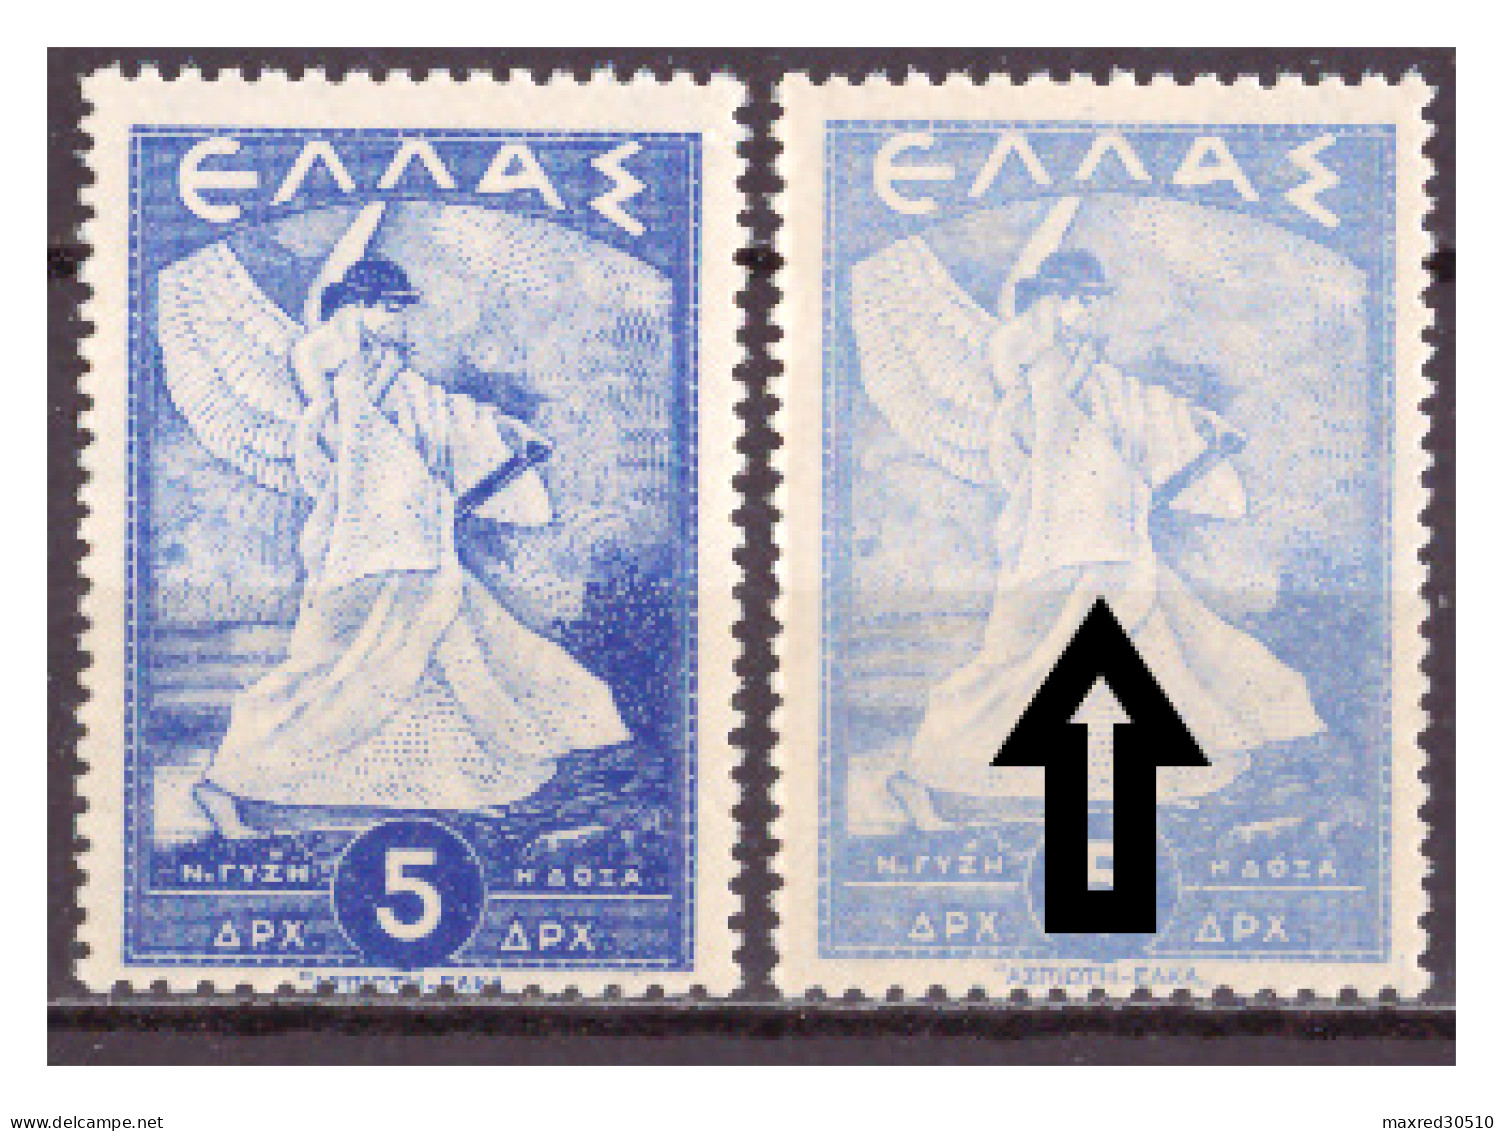 GREECE 1945 2X5L. OF THE "GLORY ISSUE" THE 2ND ONE (SEE ARROW) WITH CLEAR COLOR DIFFERENCE ERROR MNH - Variedades Y Curiosidades